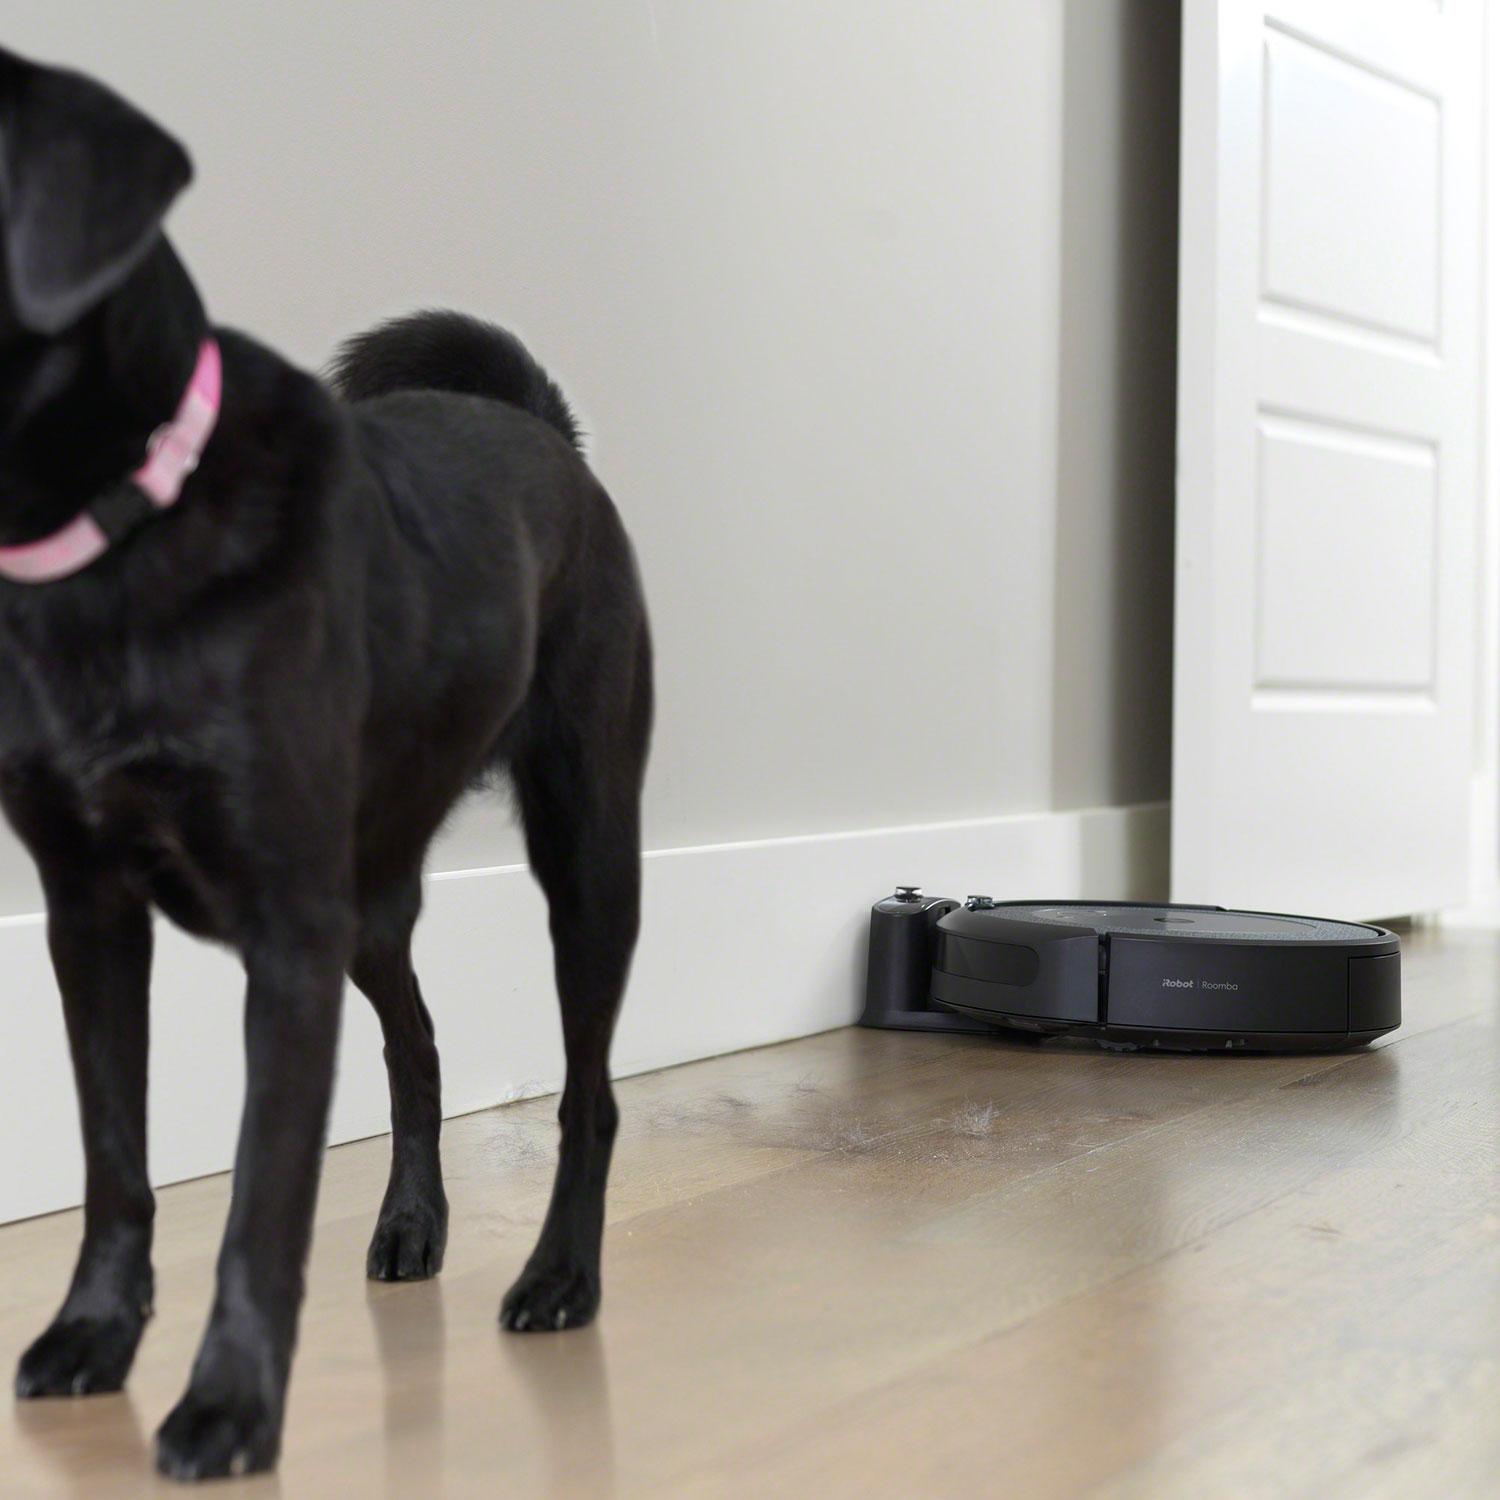 Choosing a robot vacuum in a home with pets